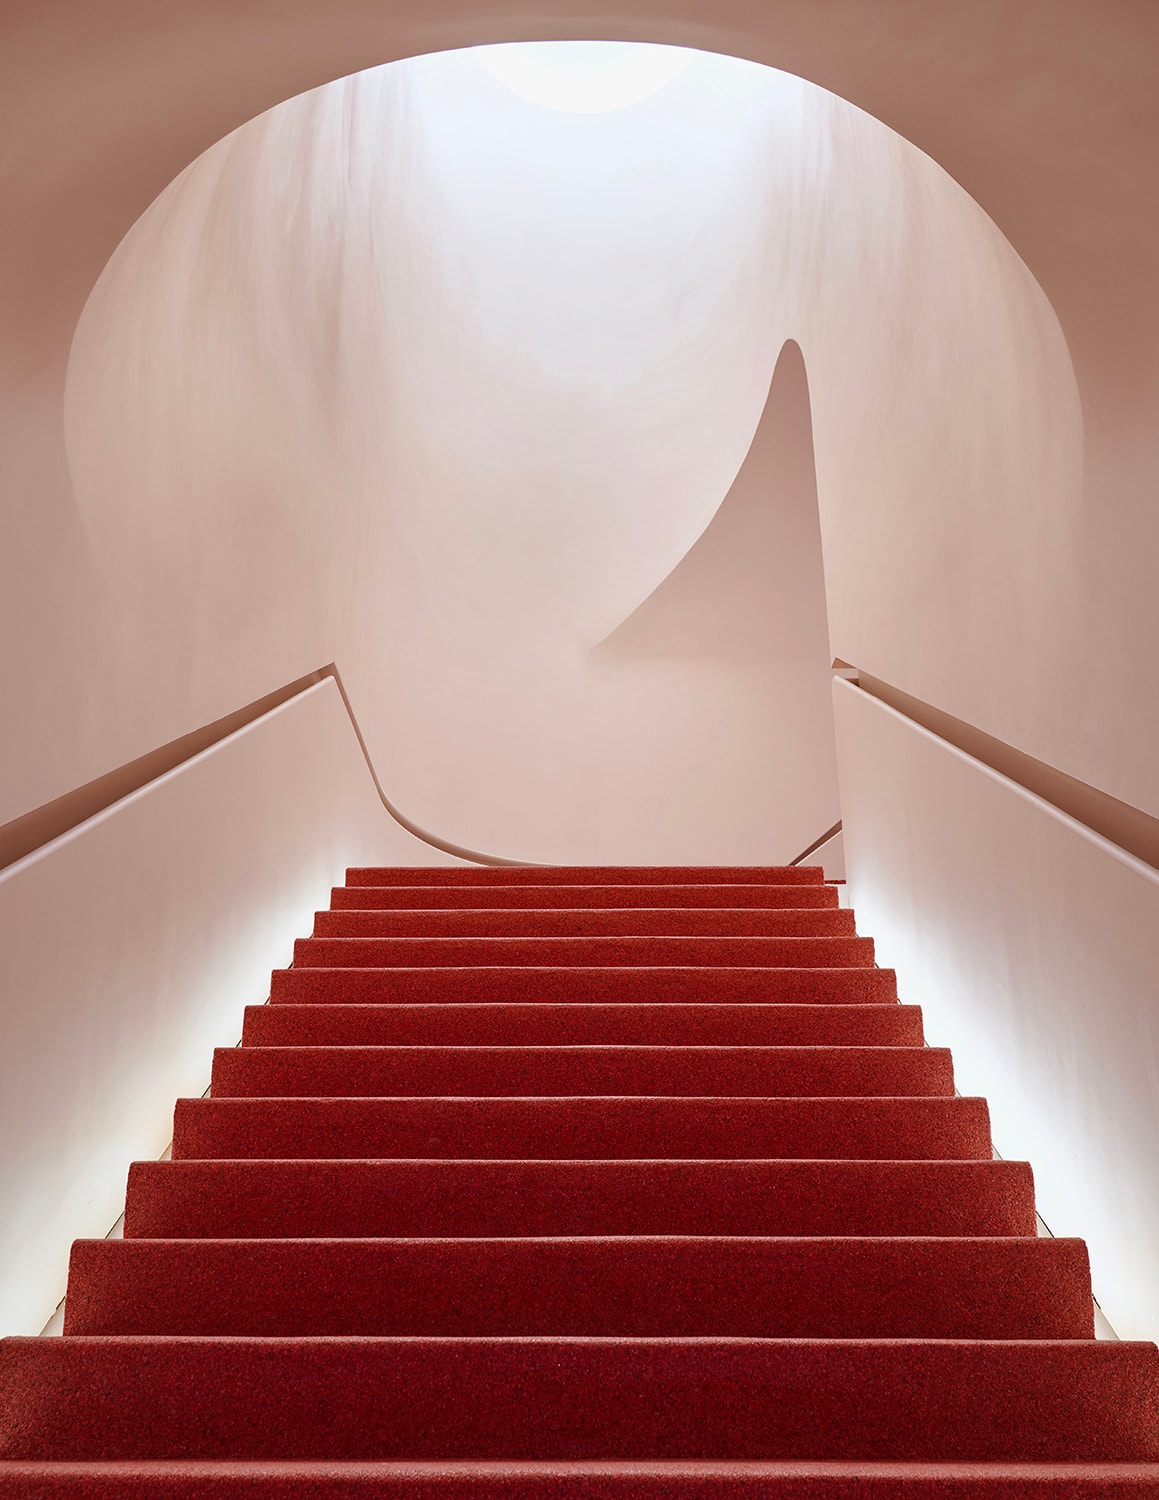 Glossier Flagship Store Shop Manhattan New York Emily Weiss 2018 November 8 123 Lafayette Street Makeup Skincare Beauty Cosmetics Pink Stairs Staircase Red